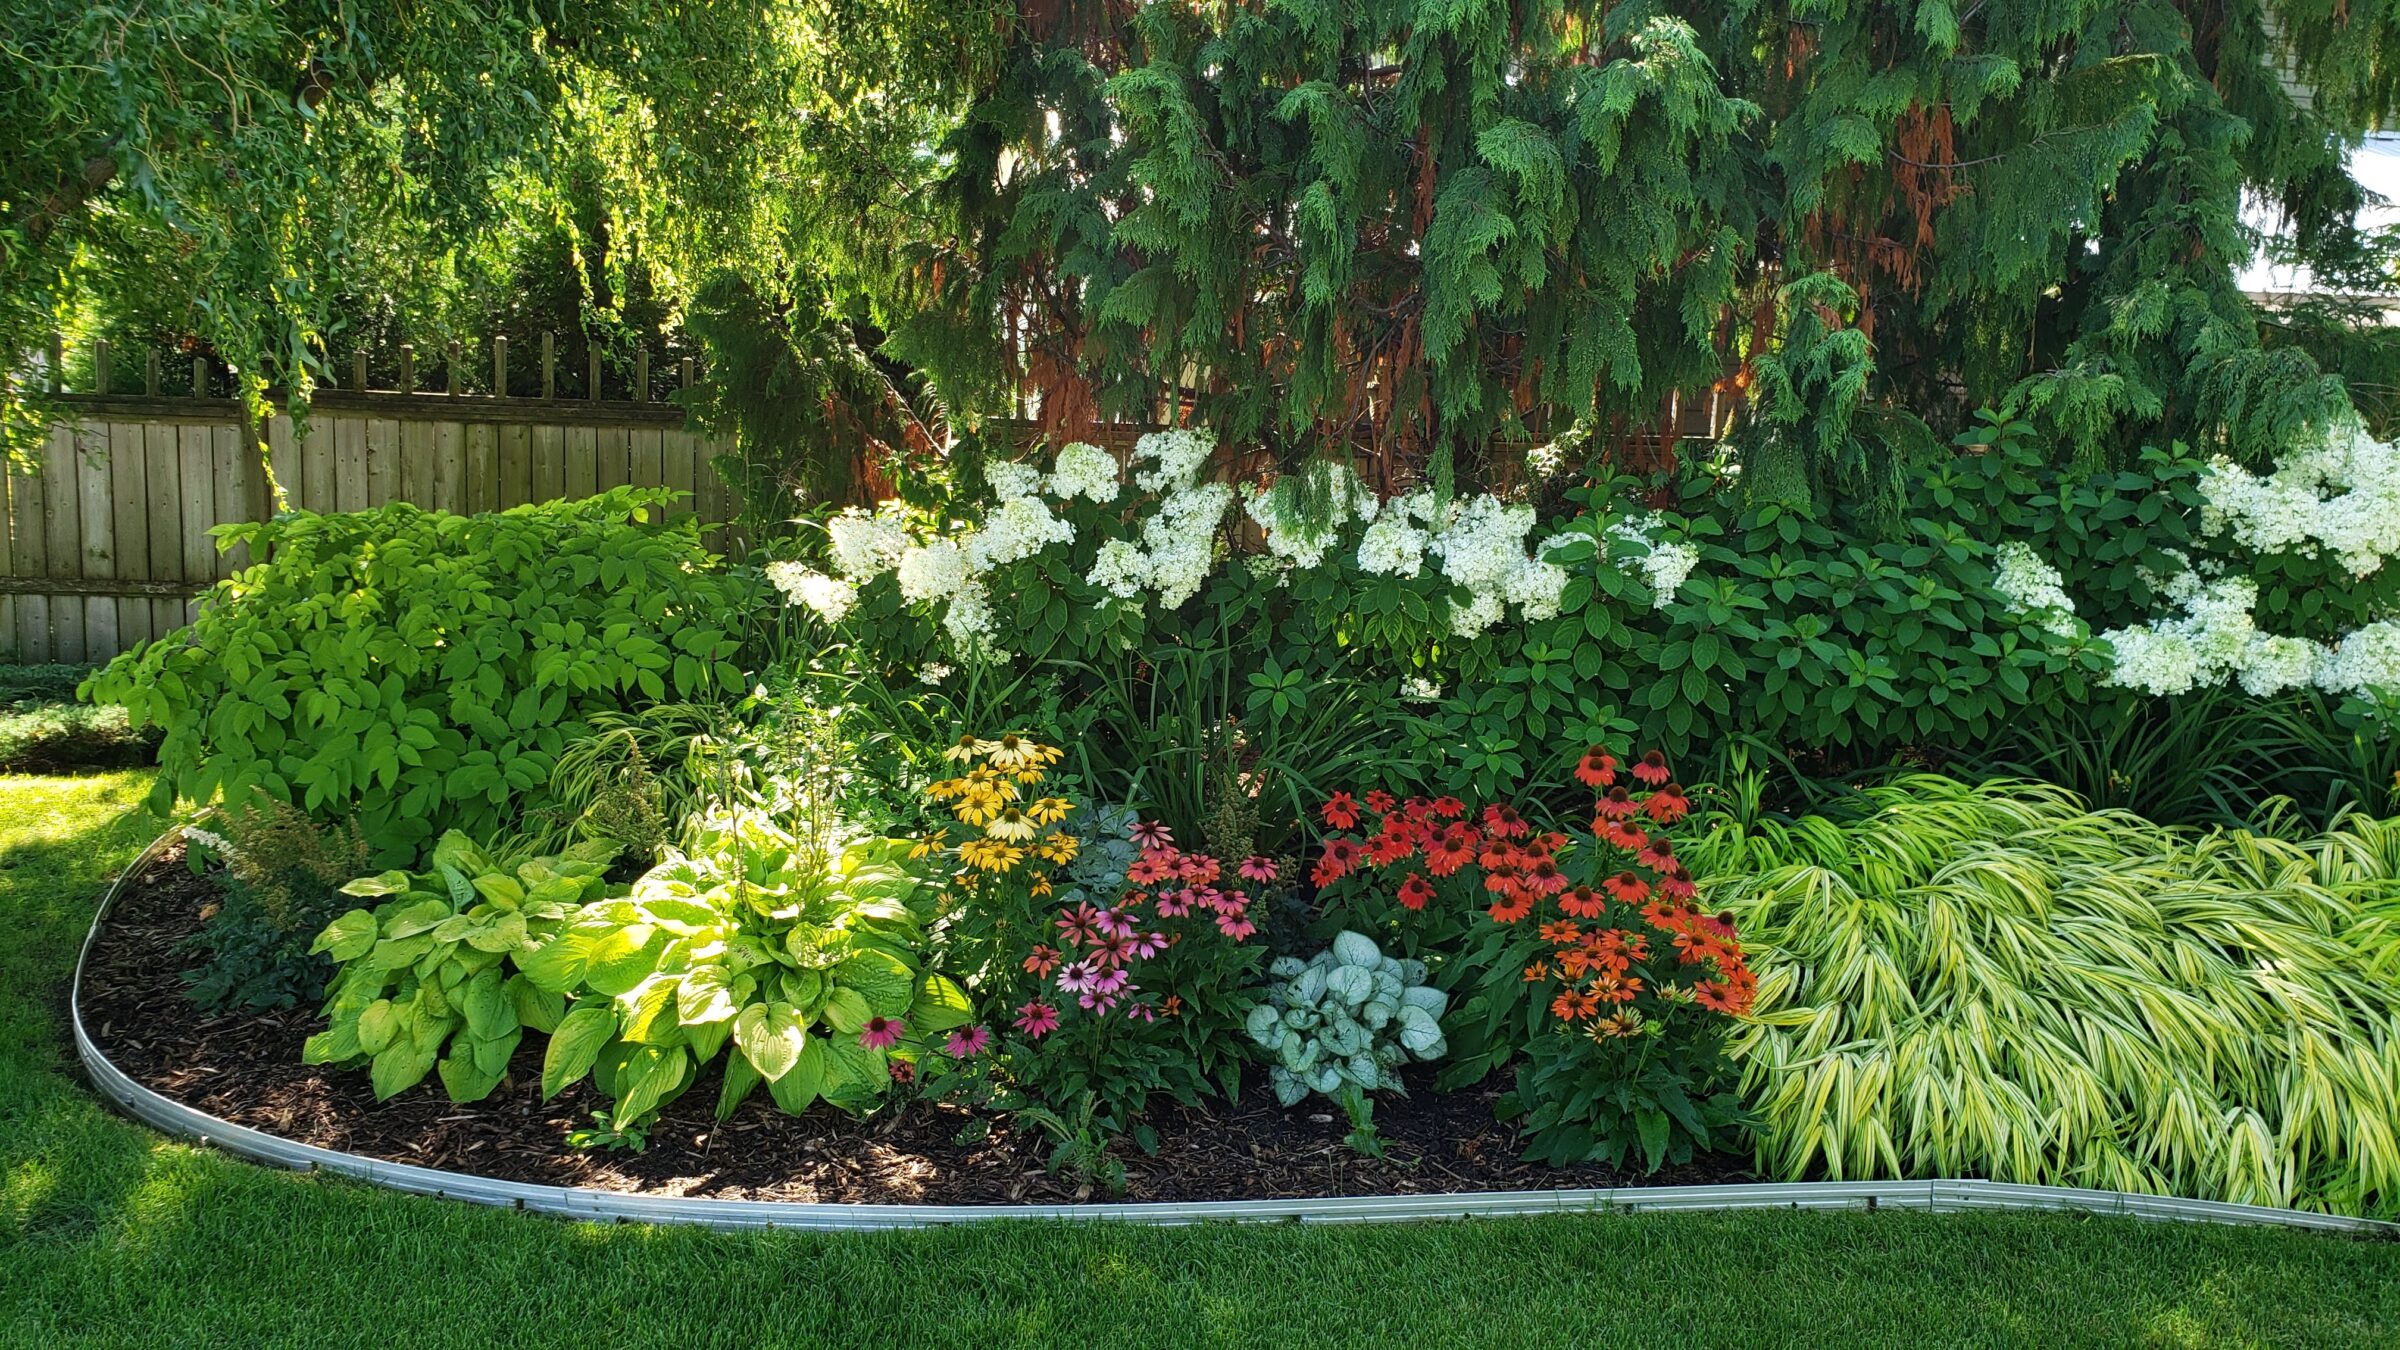 This image features a well-maintained garden with a variety of colorful flowers and lush greenery against a wooden fence, highlighted by sunshine.